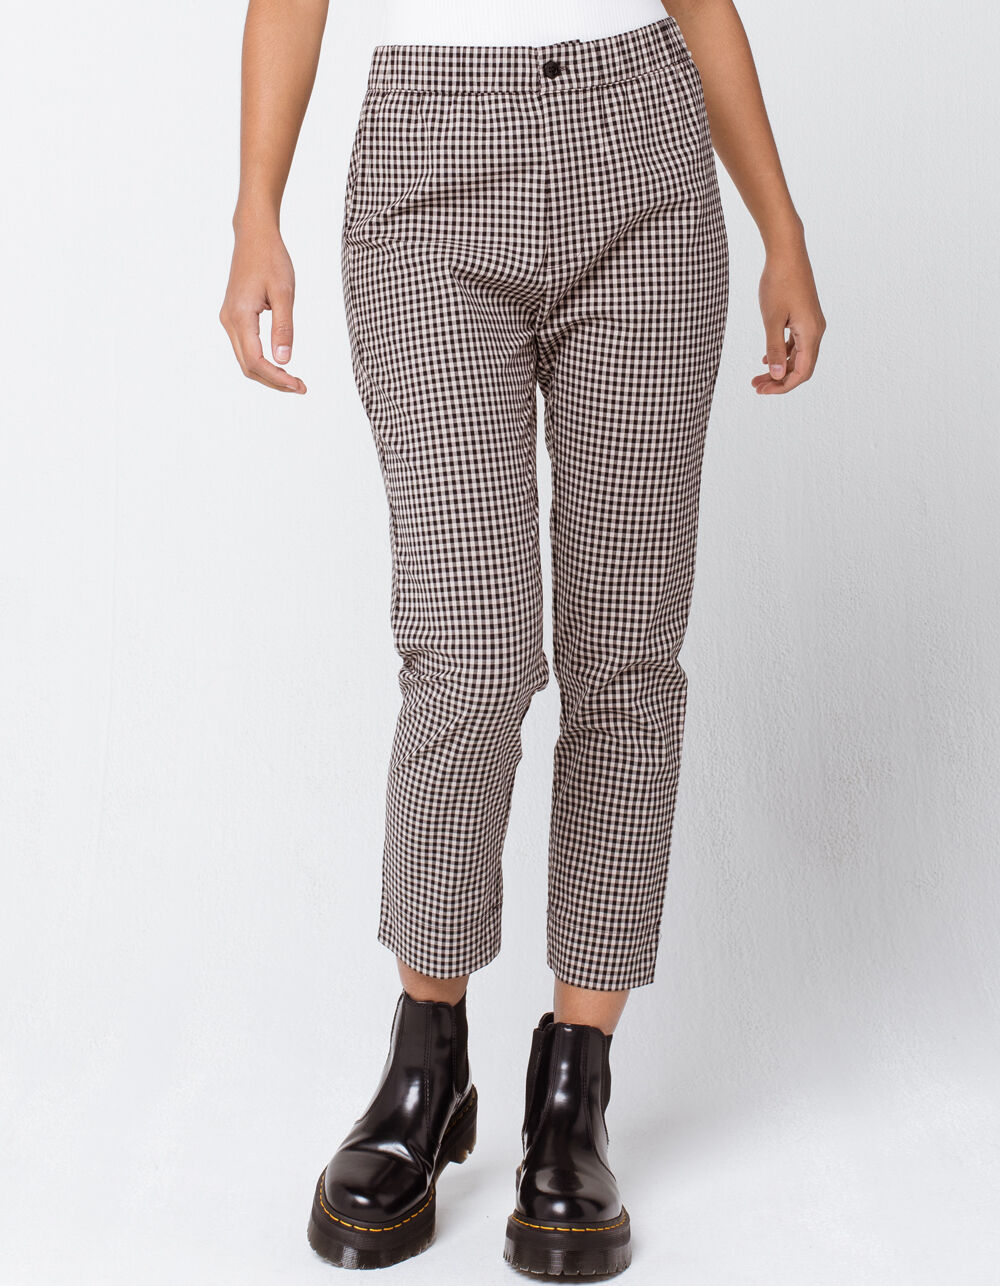 IVY & MAIN Gingham Womens Pants image number 2